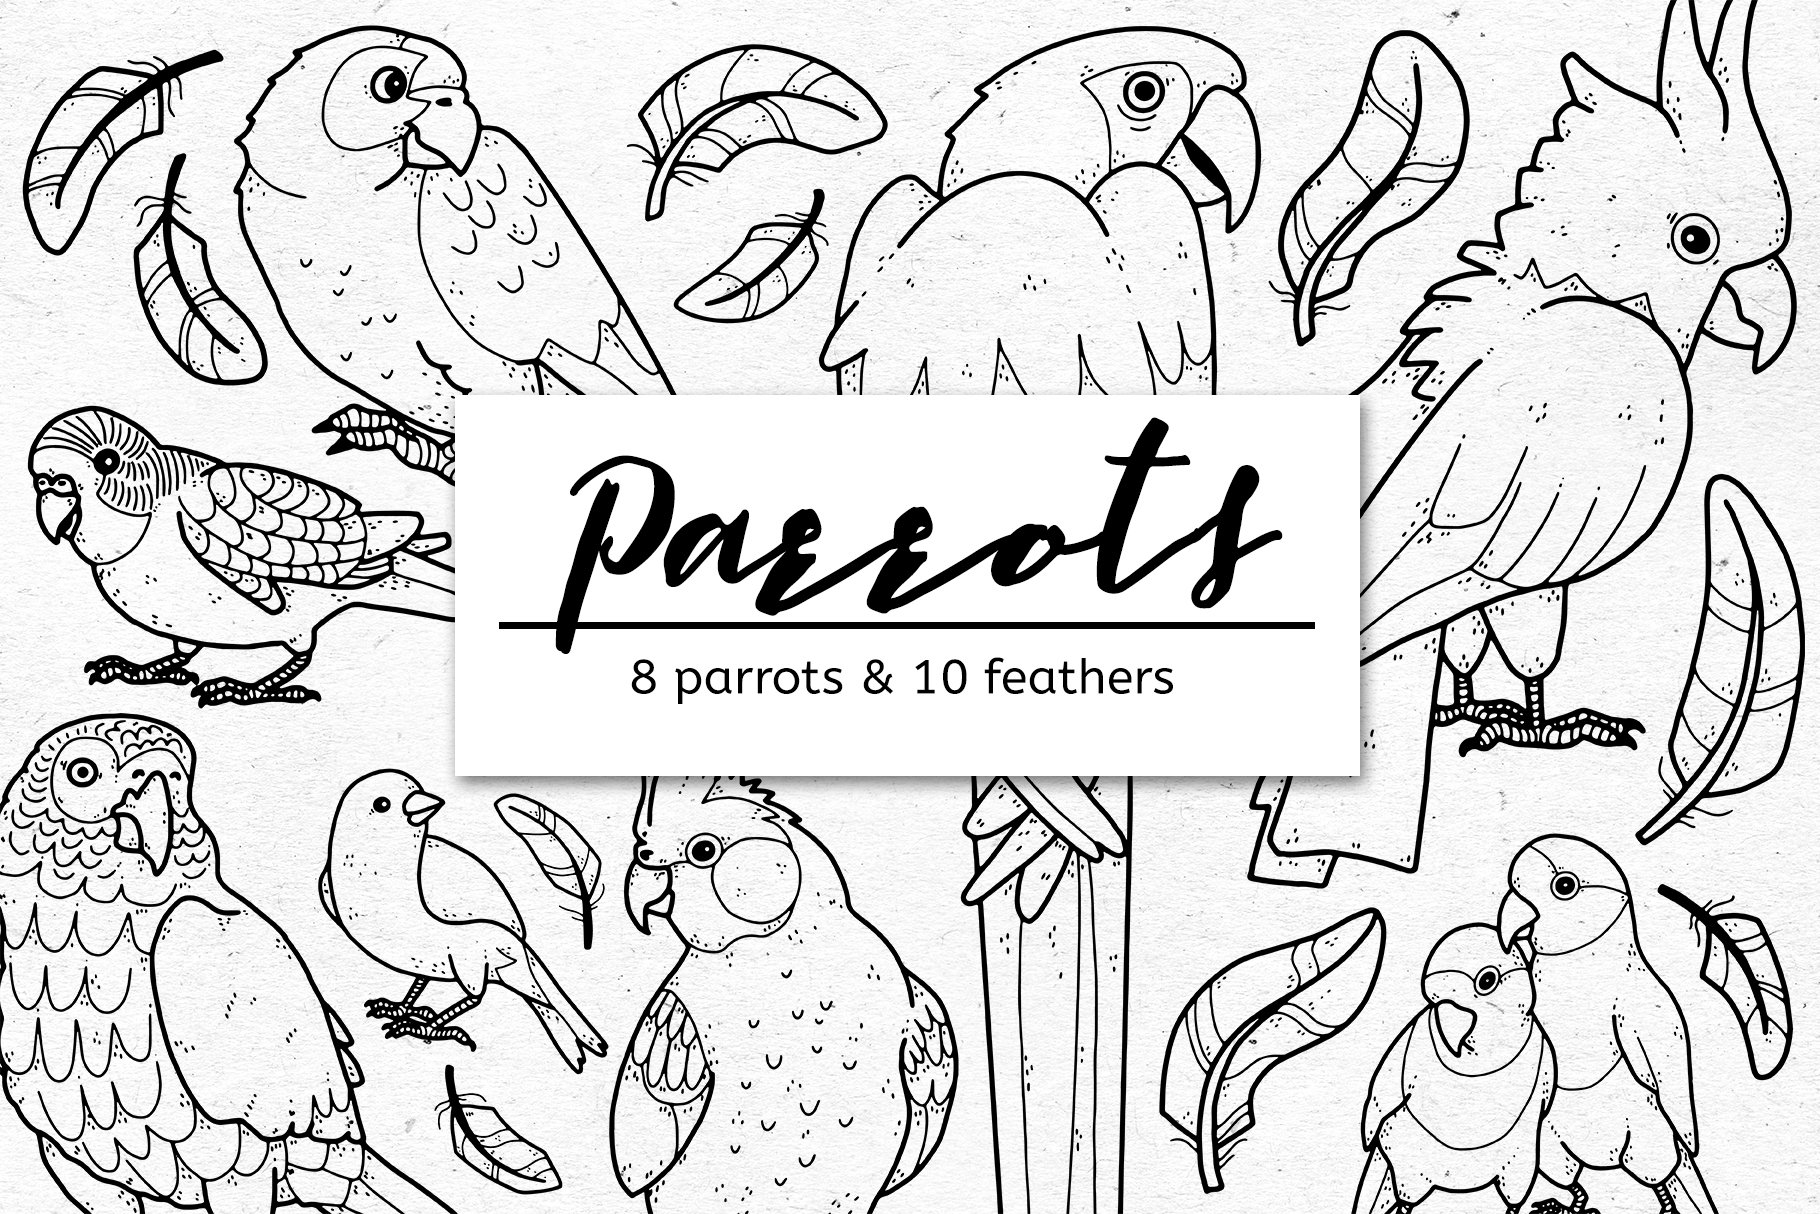 Parrots and Feathers Graphic Bundle cover image.